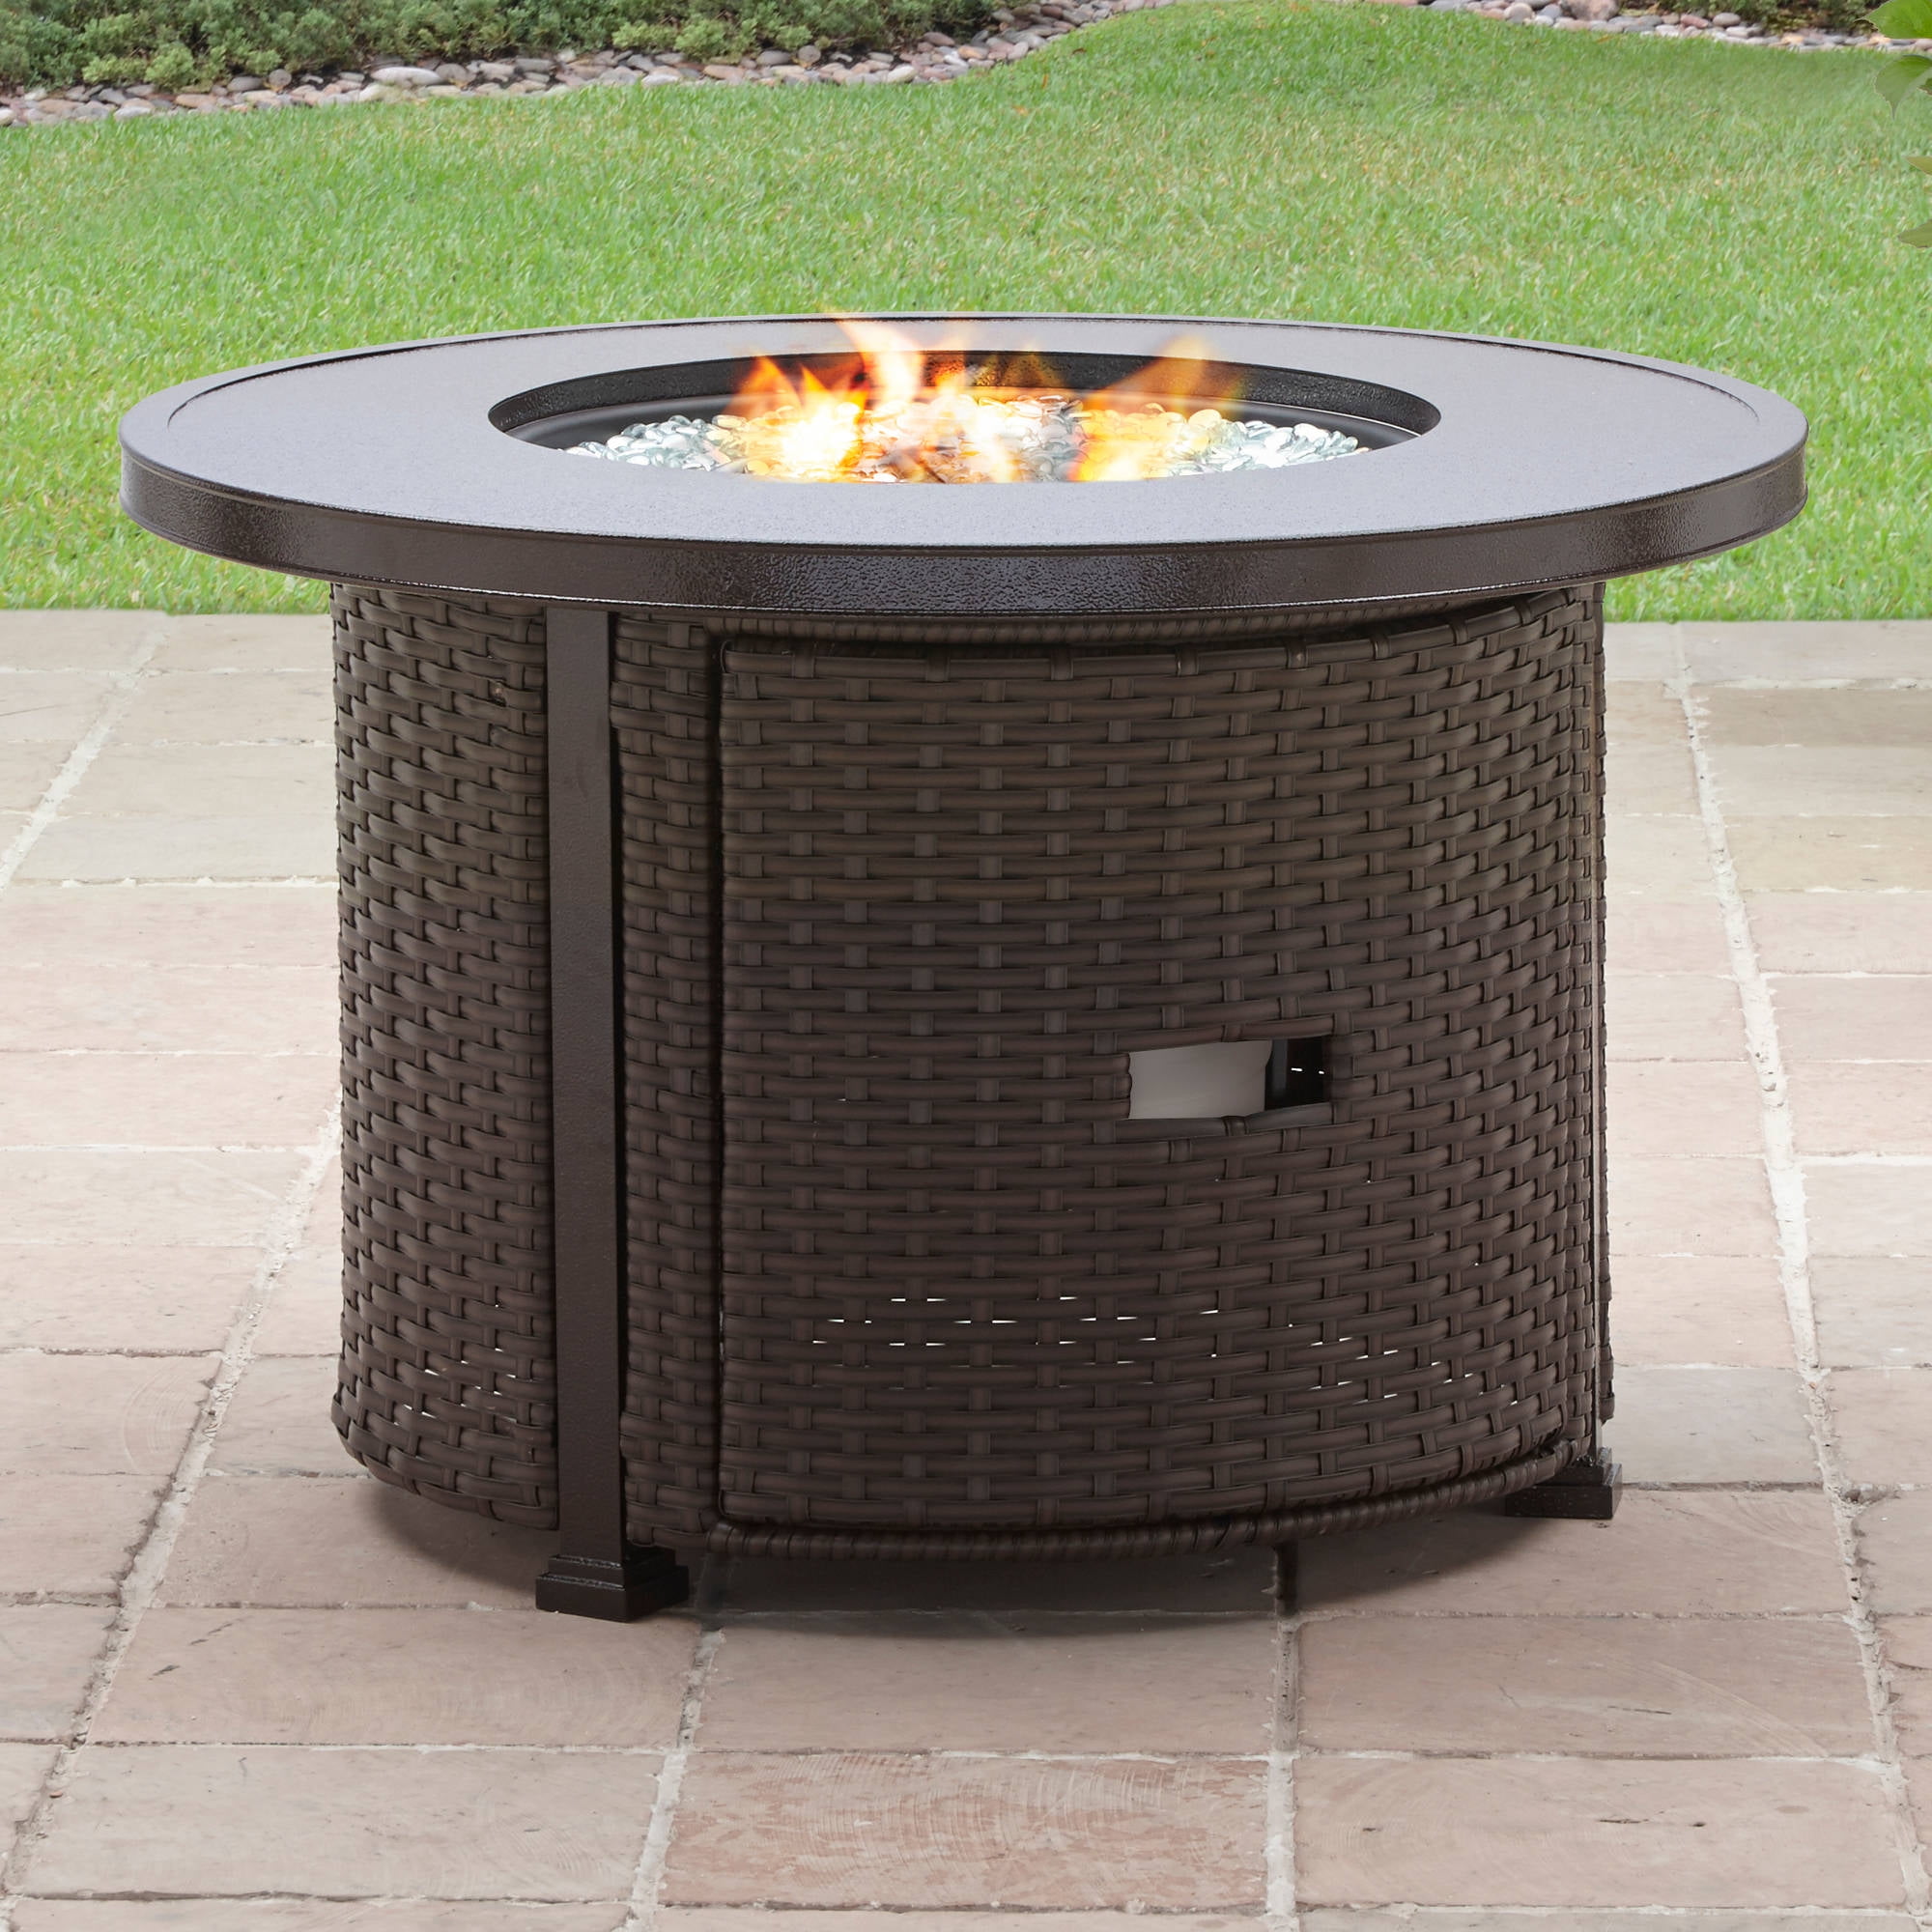 Better Homes & Gardens Colebrook 37-Inch Gas Fire Pit